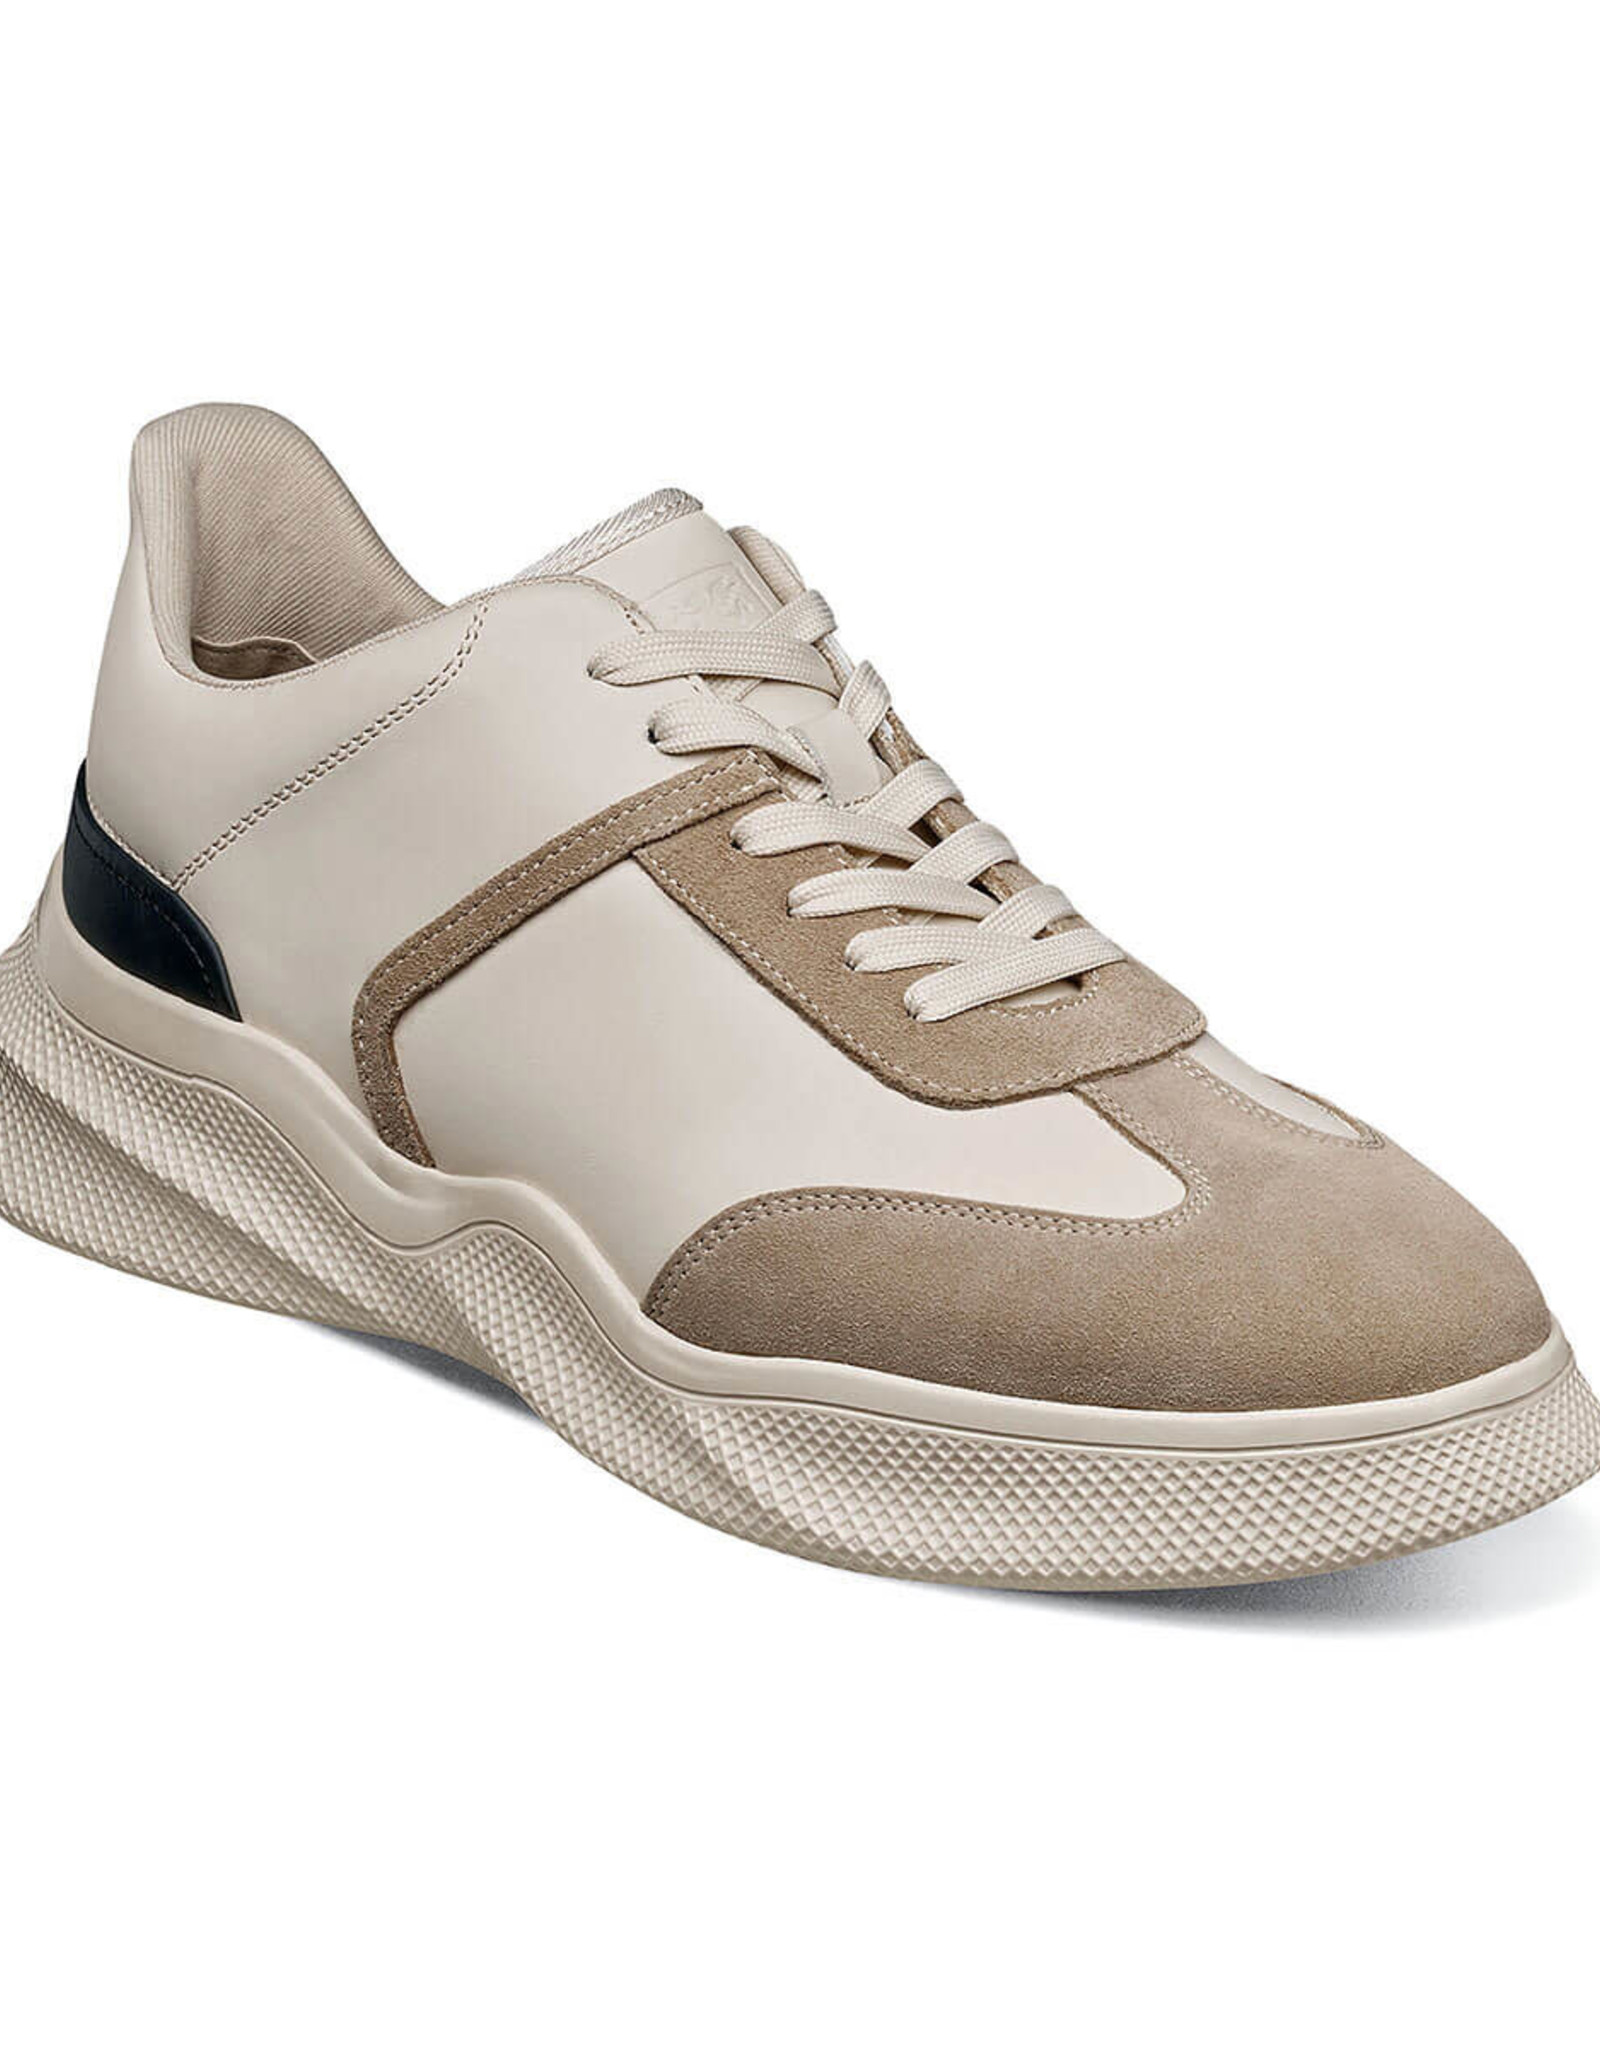 Stacy Adams Shoes Athletic Vanguard T-Toe Lace 25437 Cream and Black